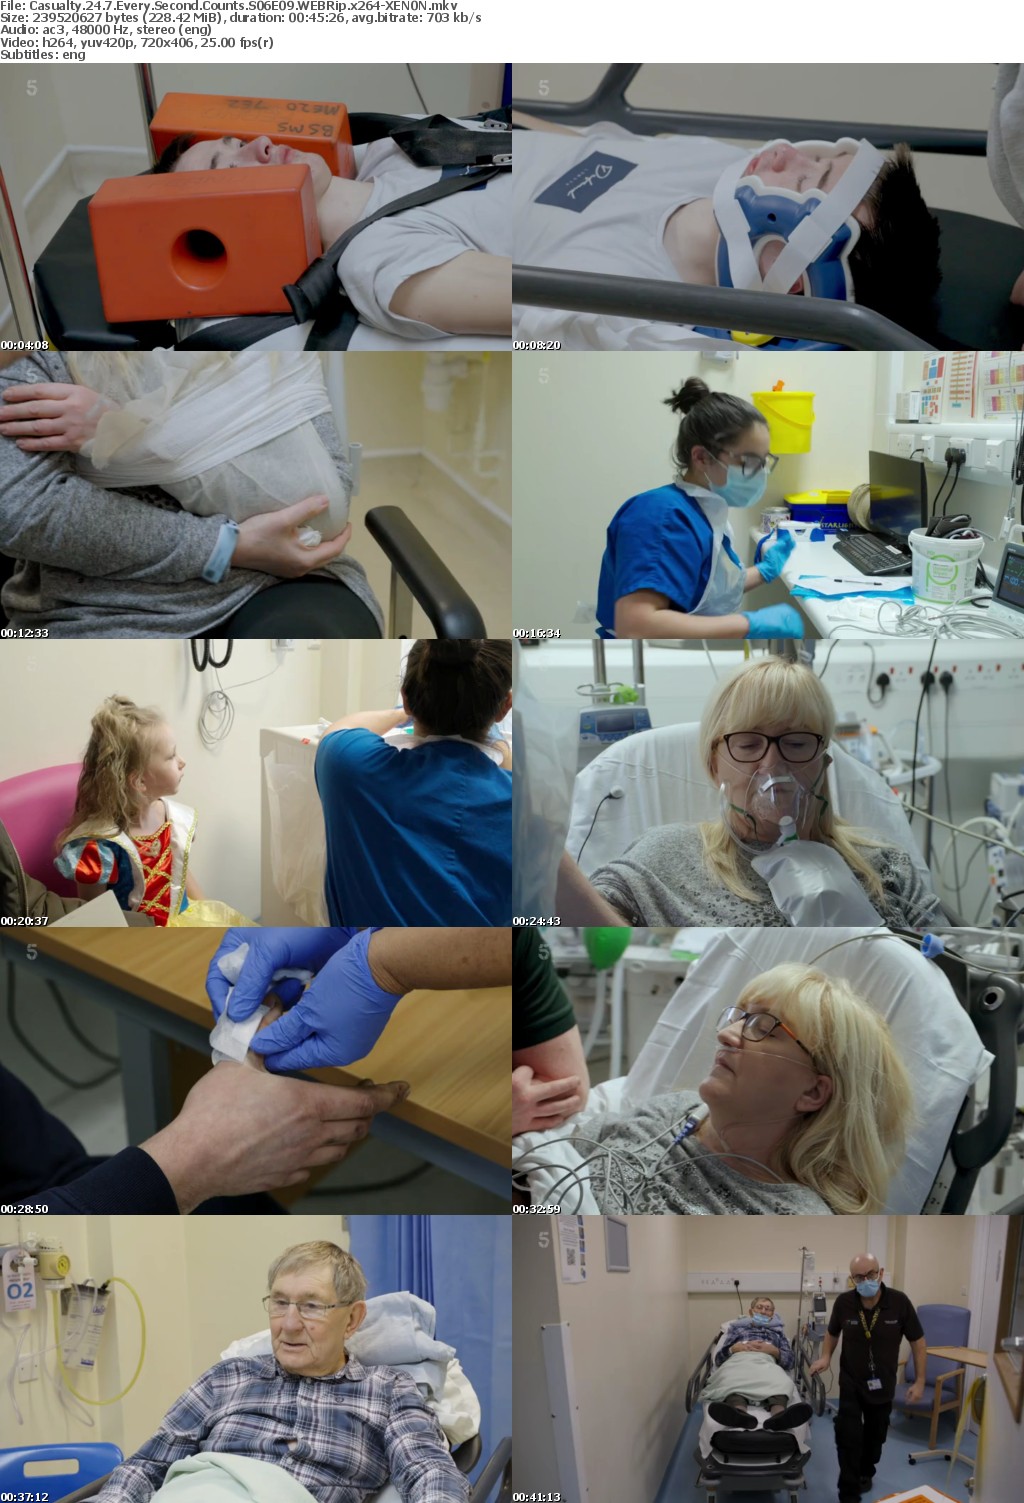 Casualty 24 7 Every Second Counts S06E09 WEBRip x264-XEN0N